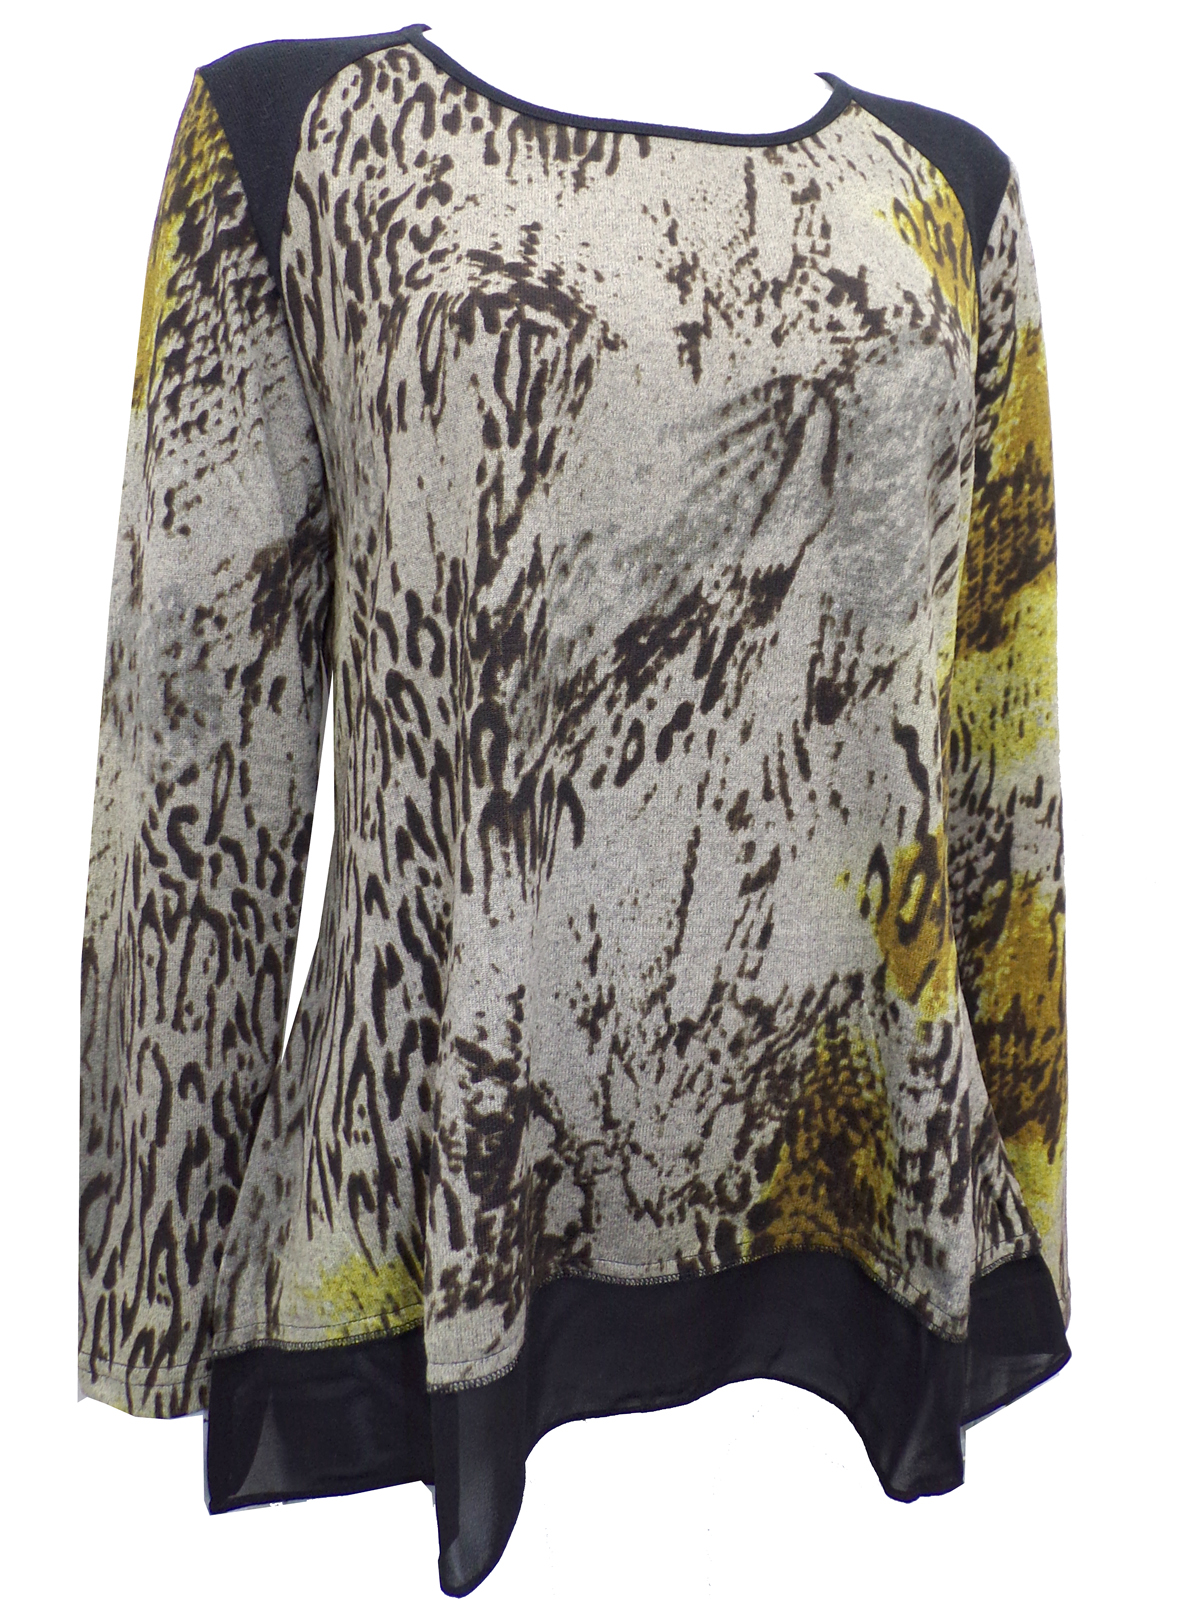 //text.. - - GREEN Animal Print Sheer Hem Top - Size Small to XLarge